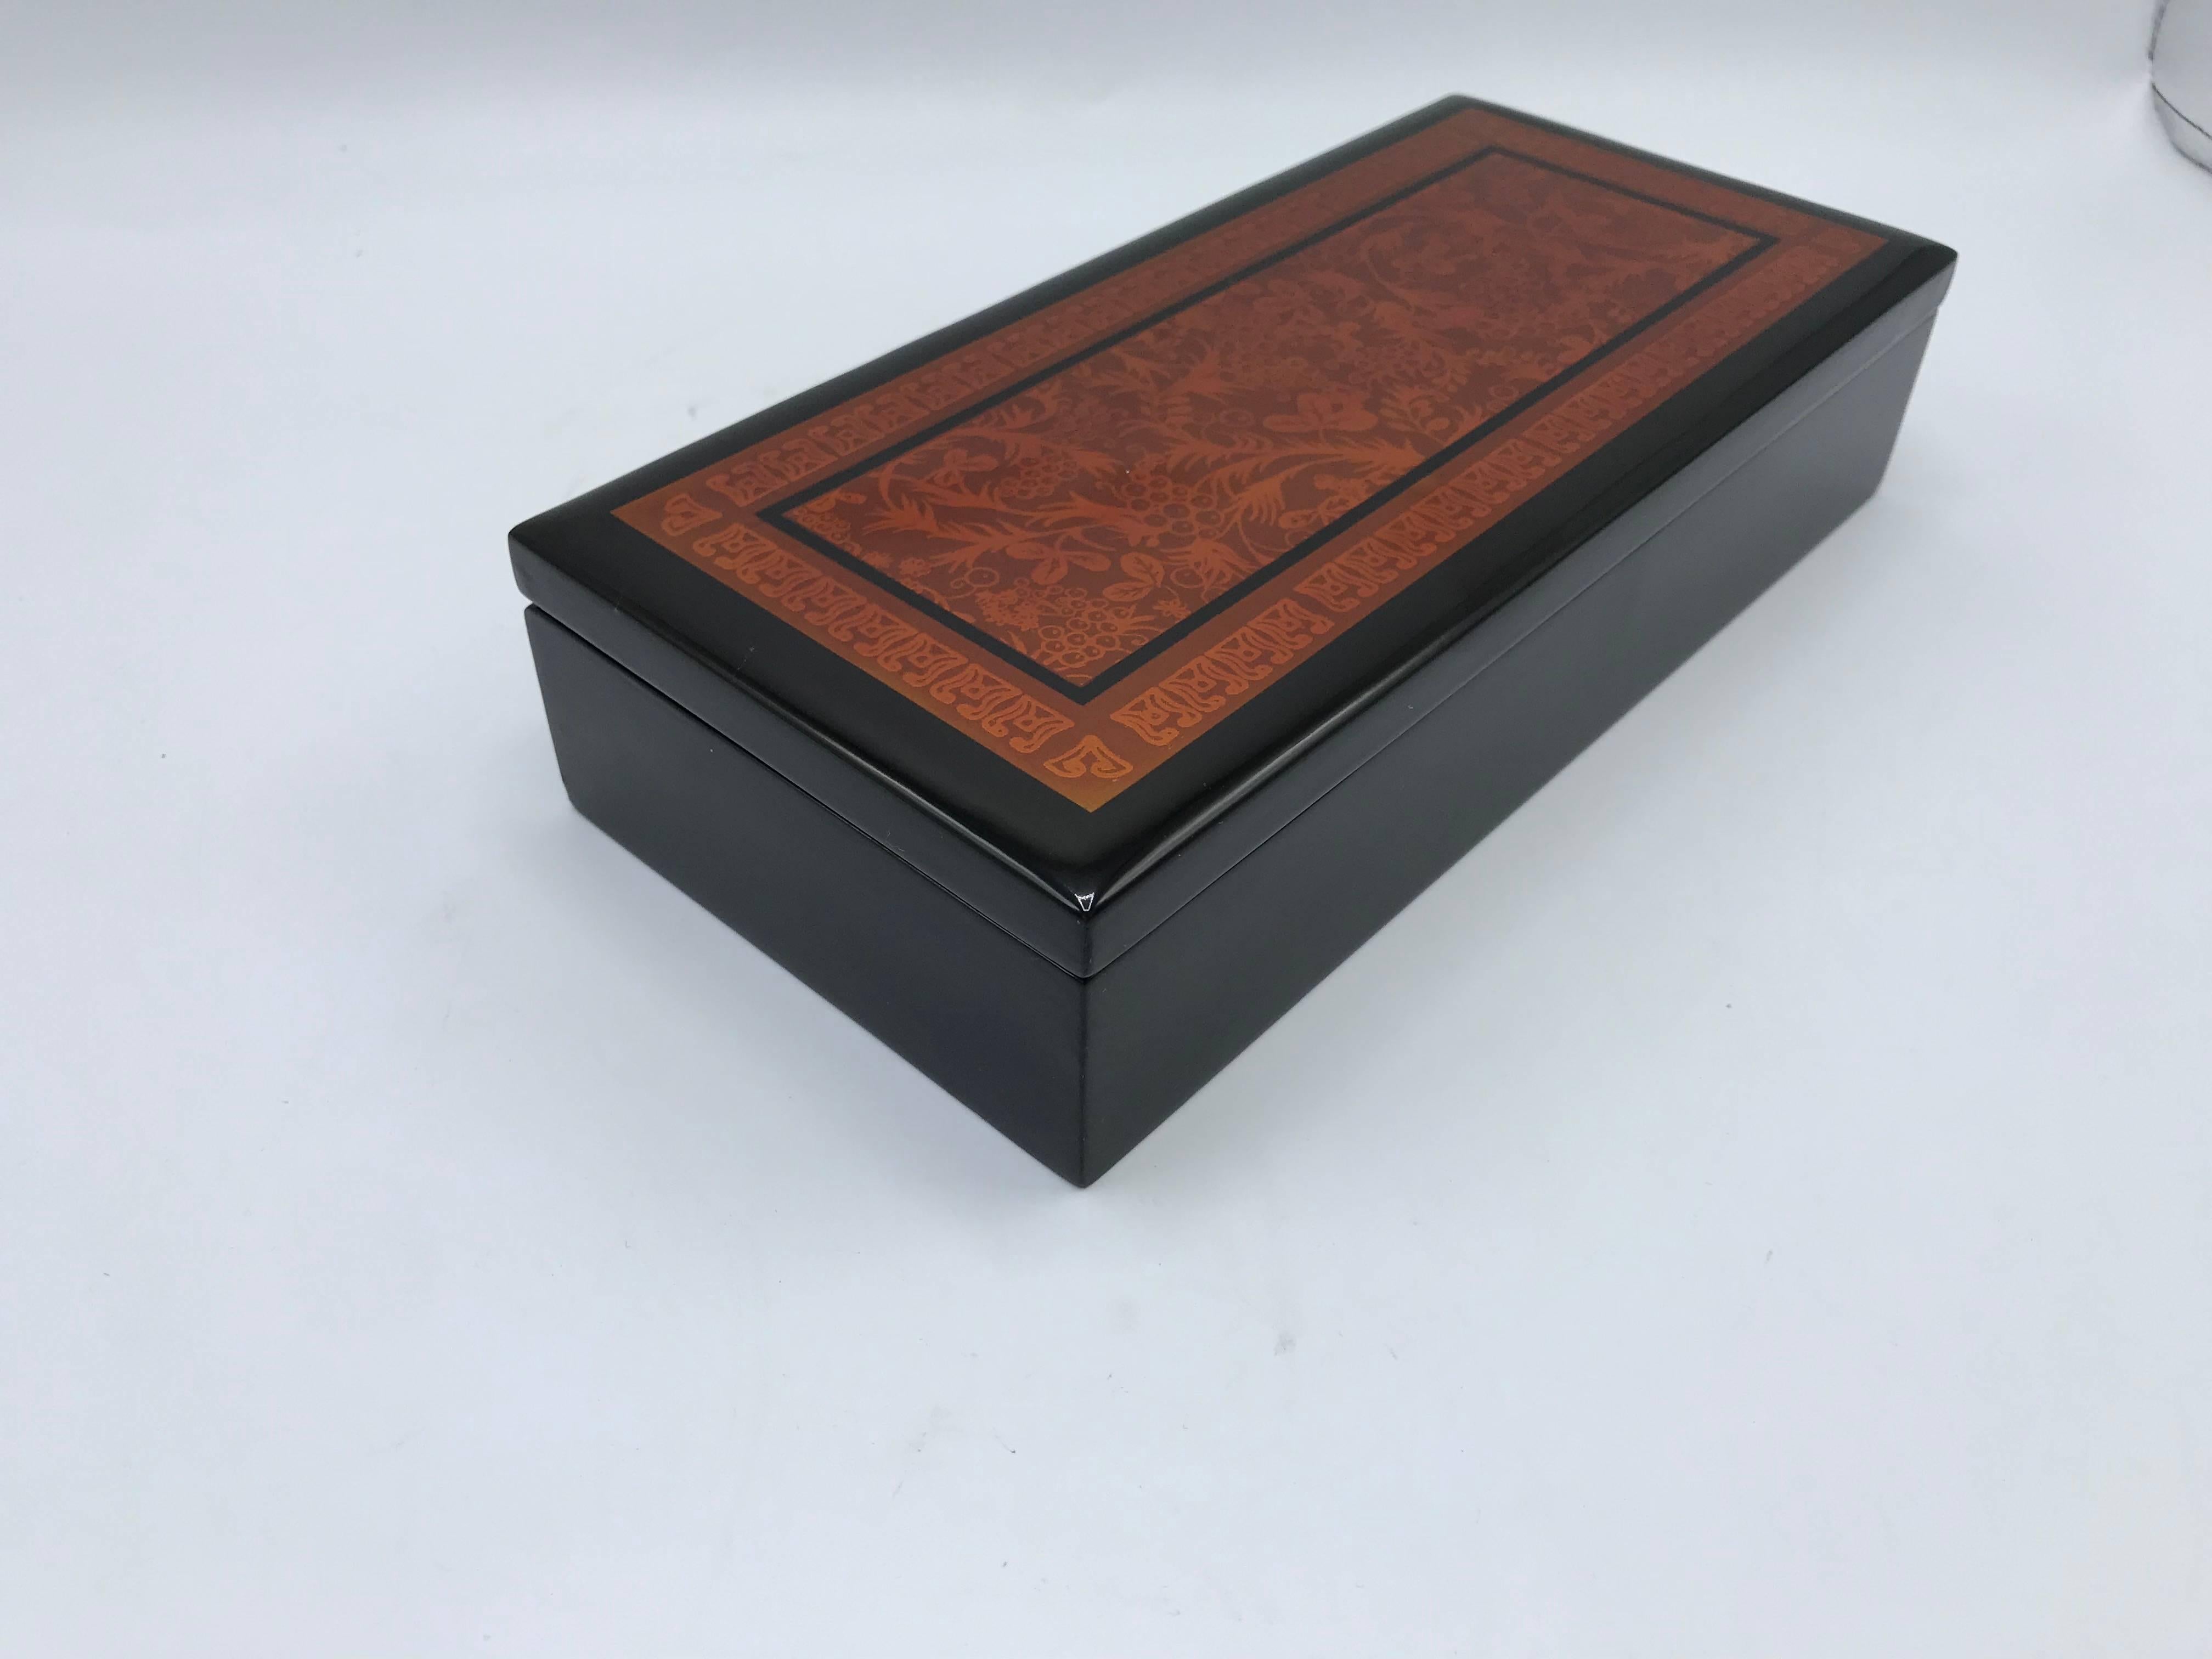 Offered is a fabulous, 1970s chinoiserie red and black lacquered box with an ornate motif on the lid. Hinged and lidded.